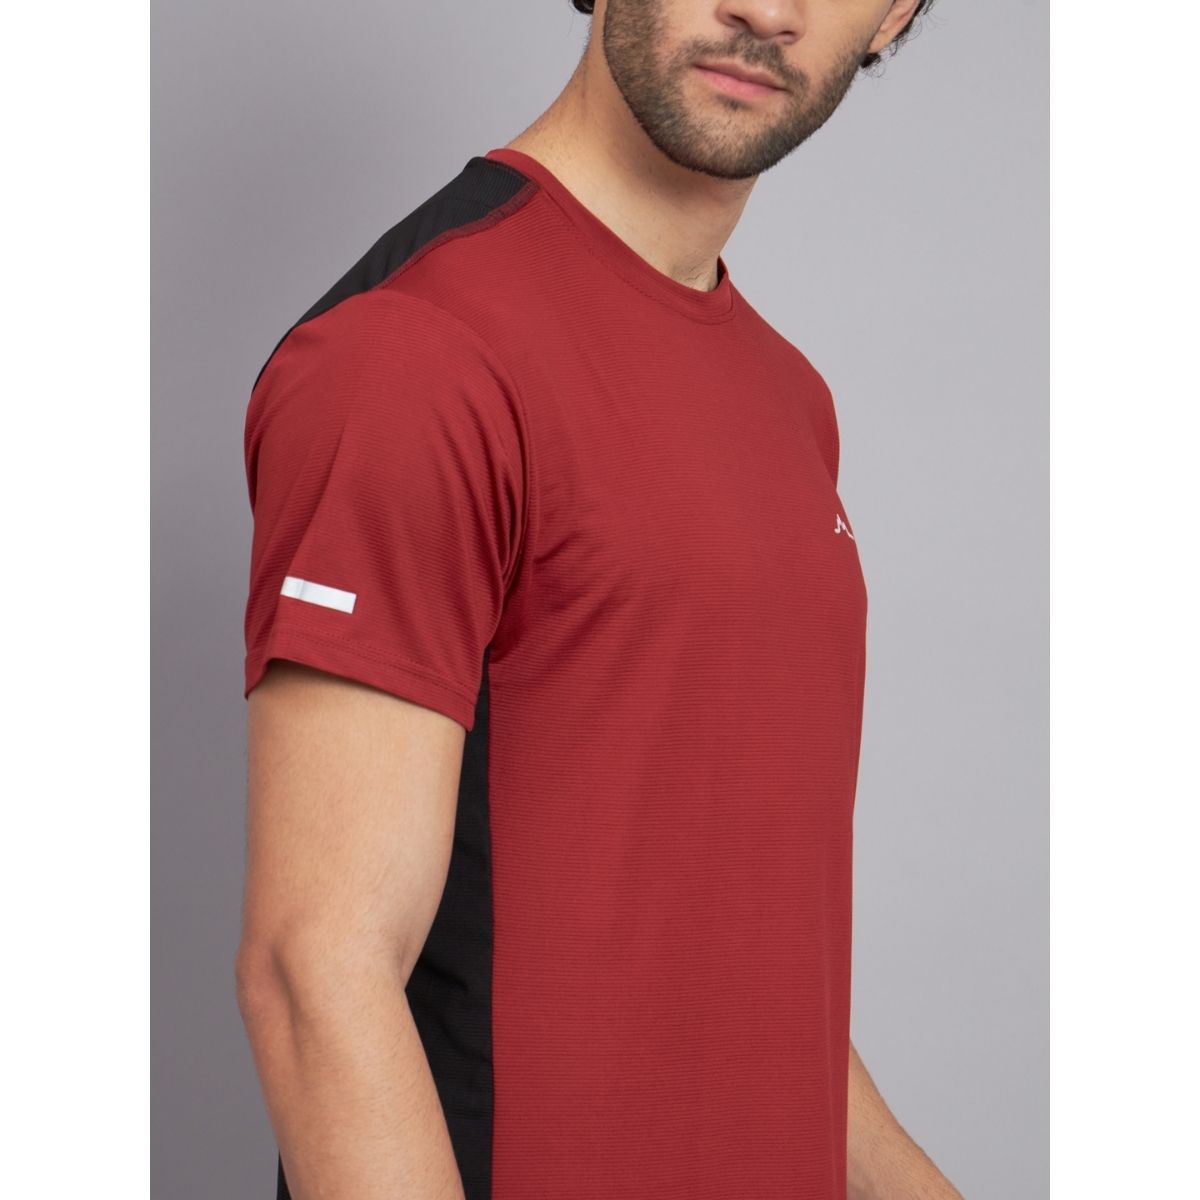 Men's Ultralight Athletic Half Sleeves T-Shirt - Canyon Red 6